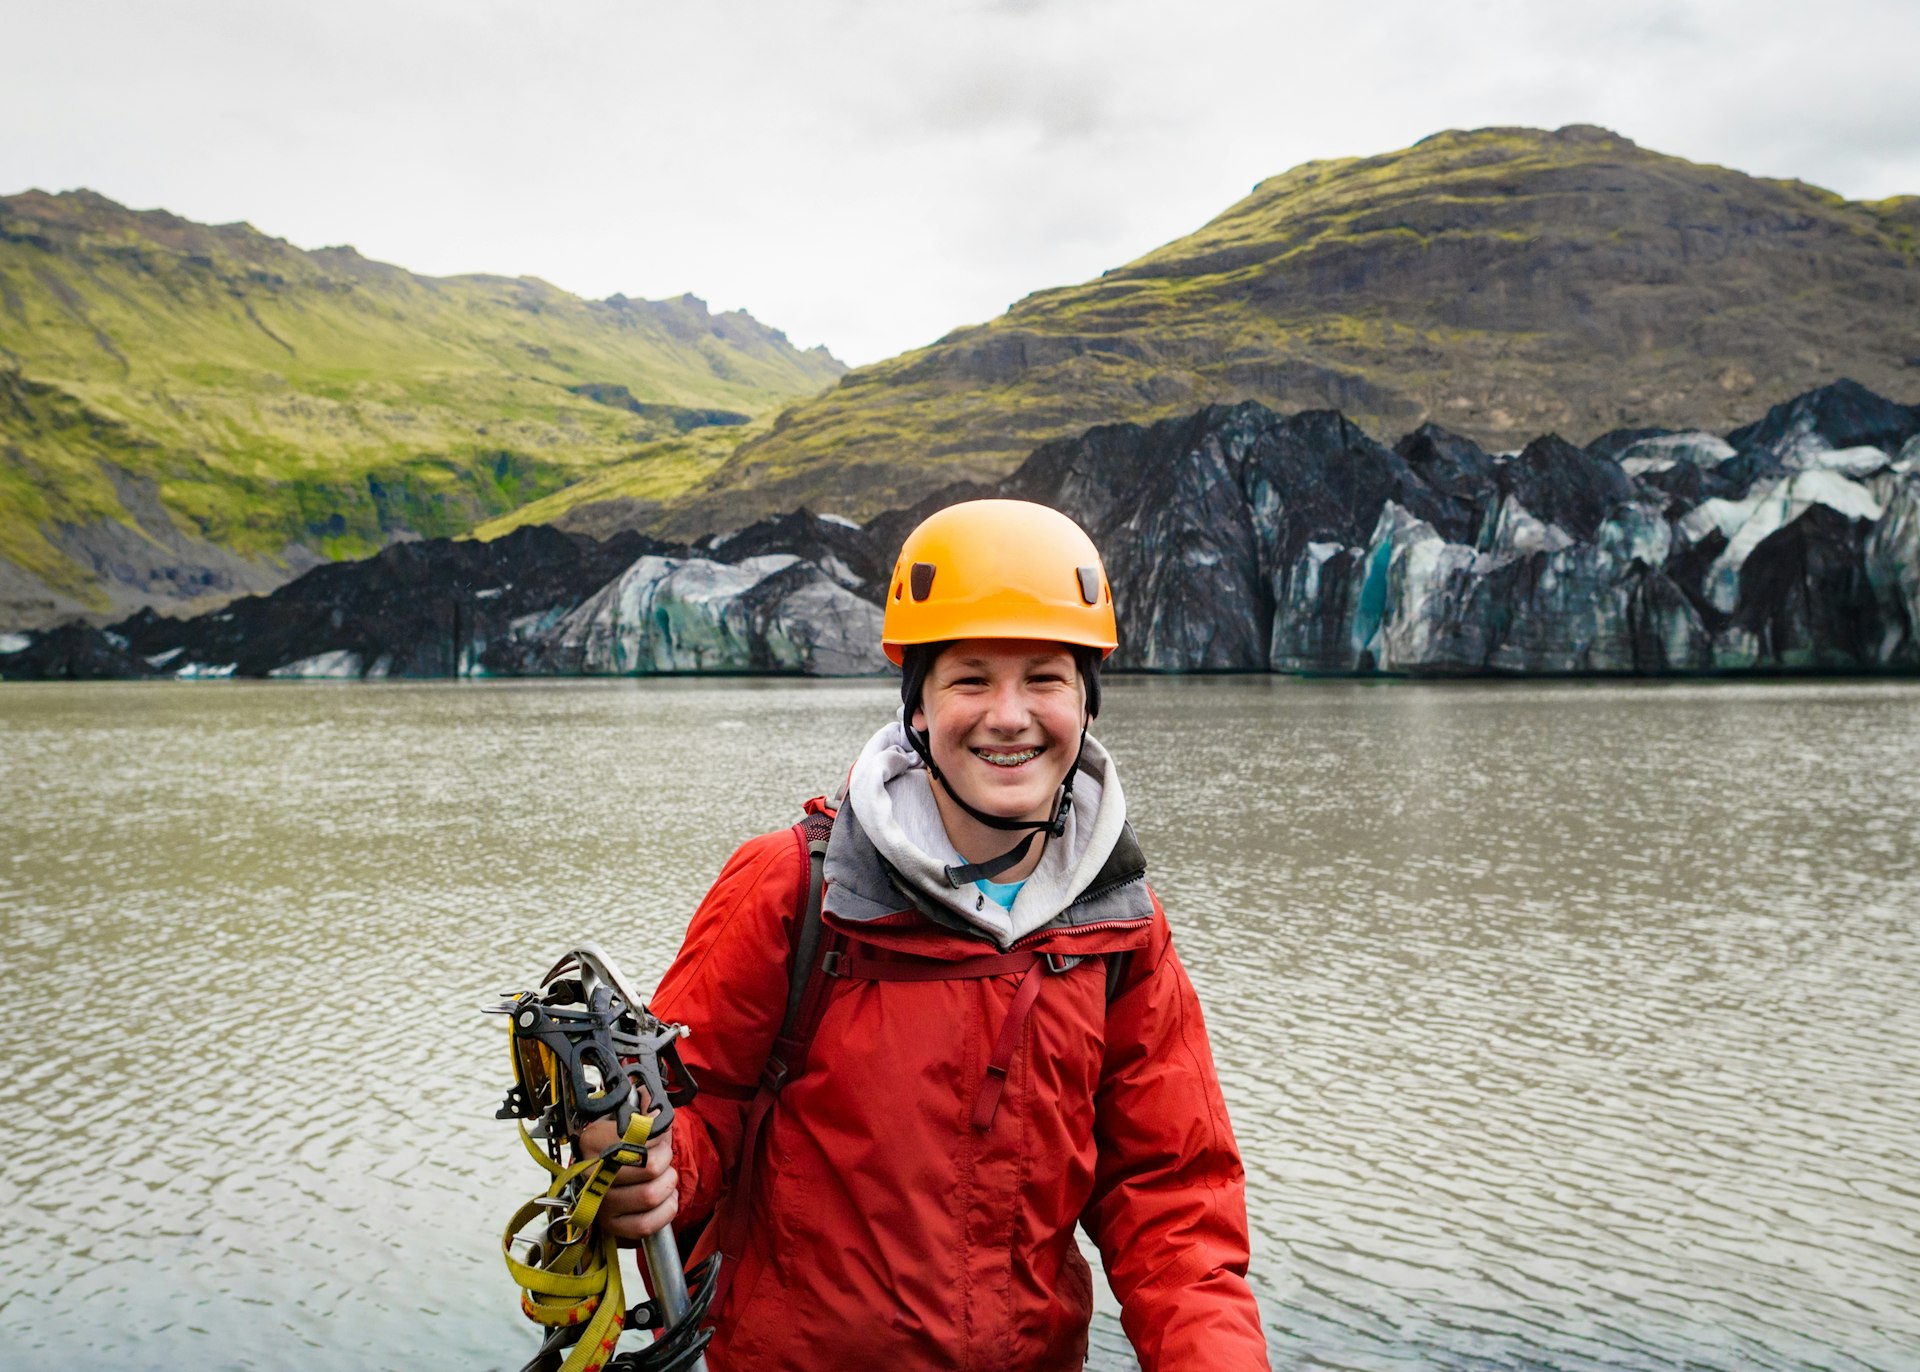 Teenage boy wearing ice climbing gear smiling in front of a glacier lake and blue colored ice glacier, Sólheimajökull, Iceland